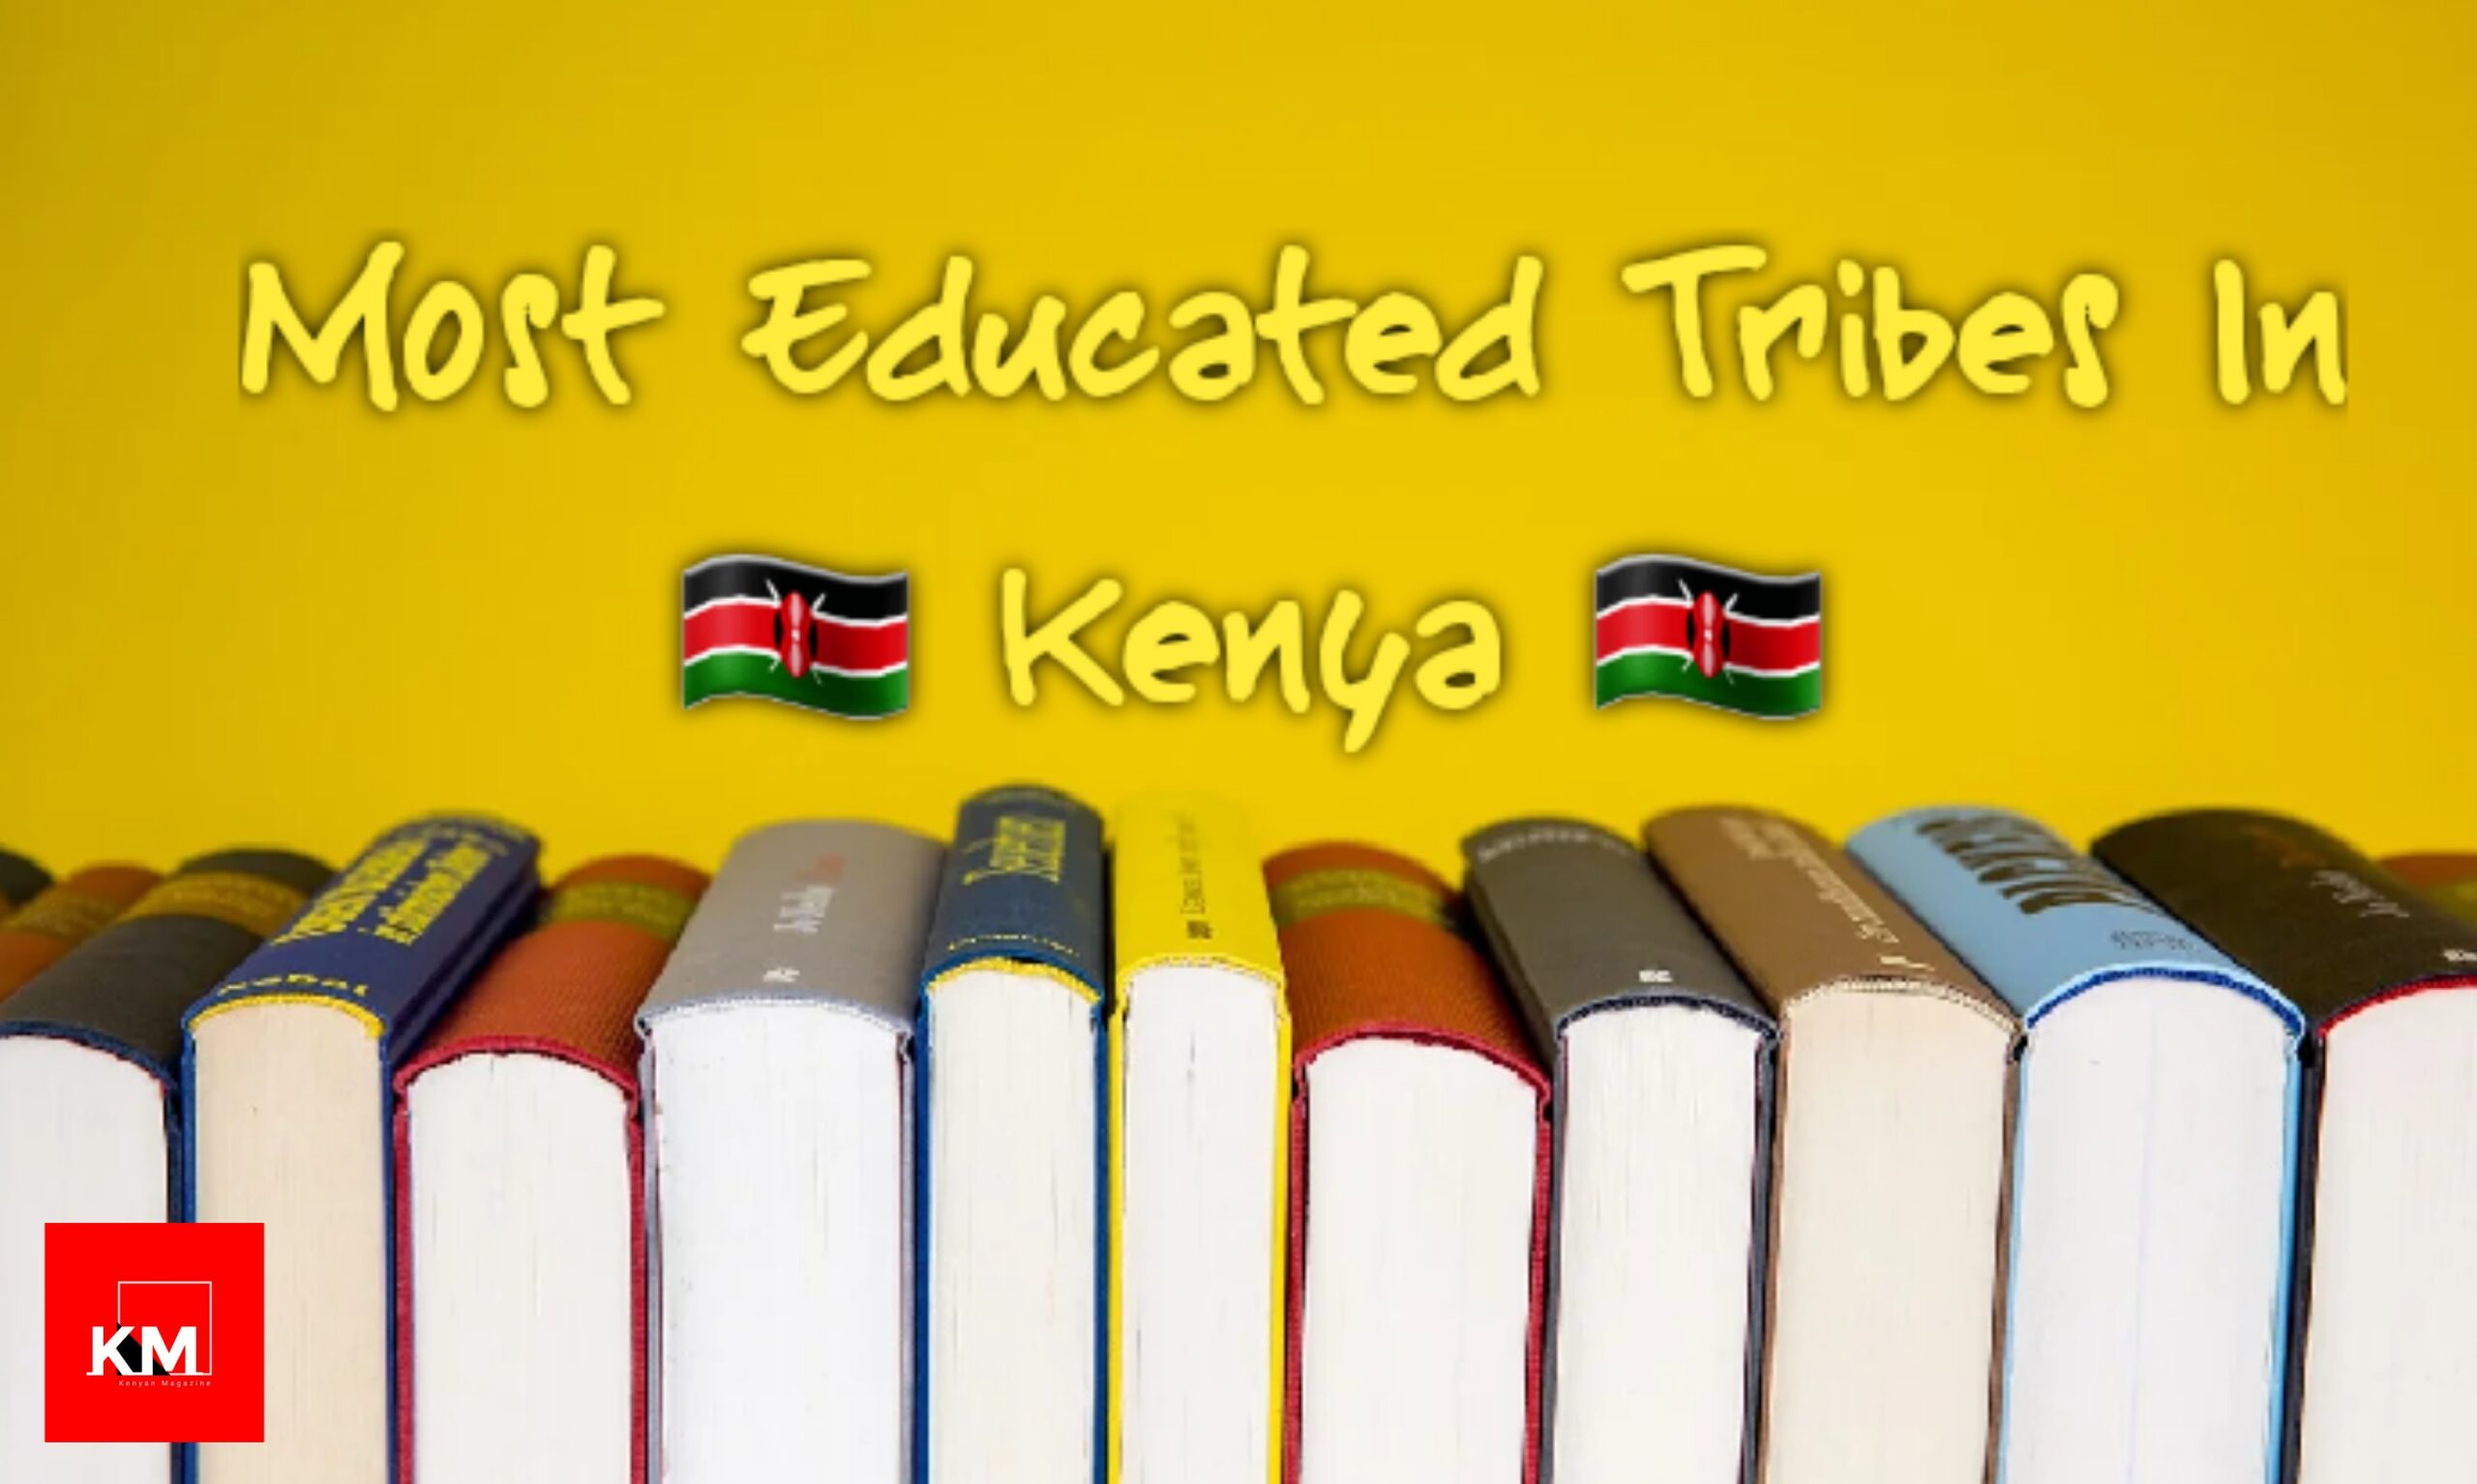 Most Educated Tribes In Kenya